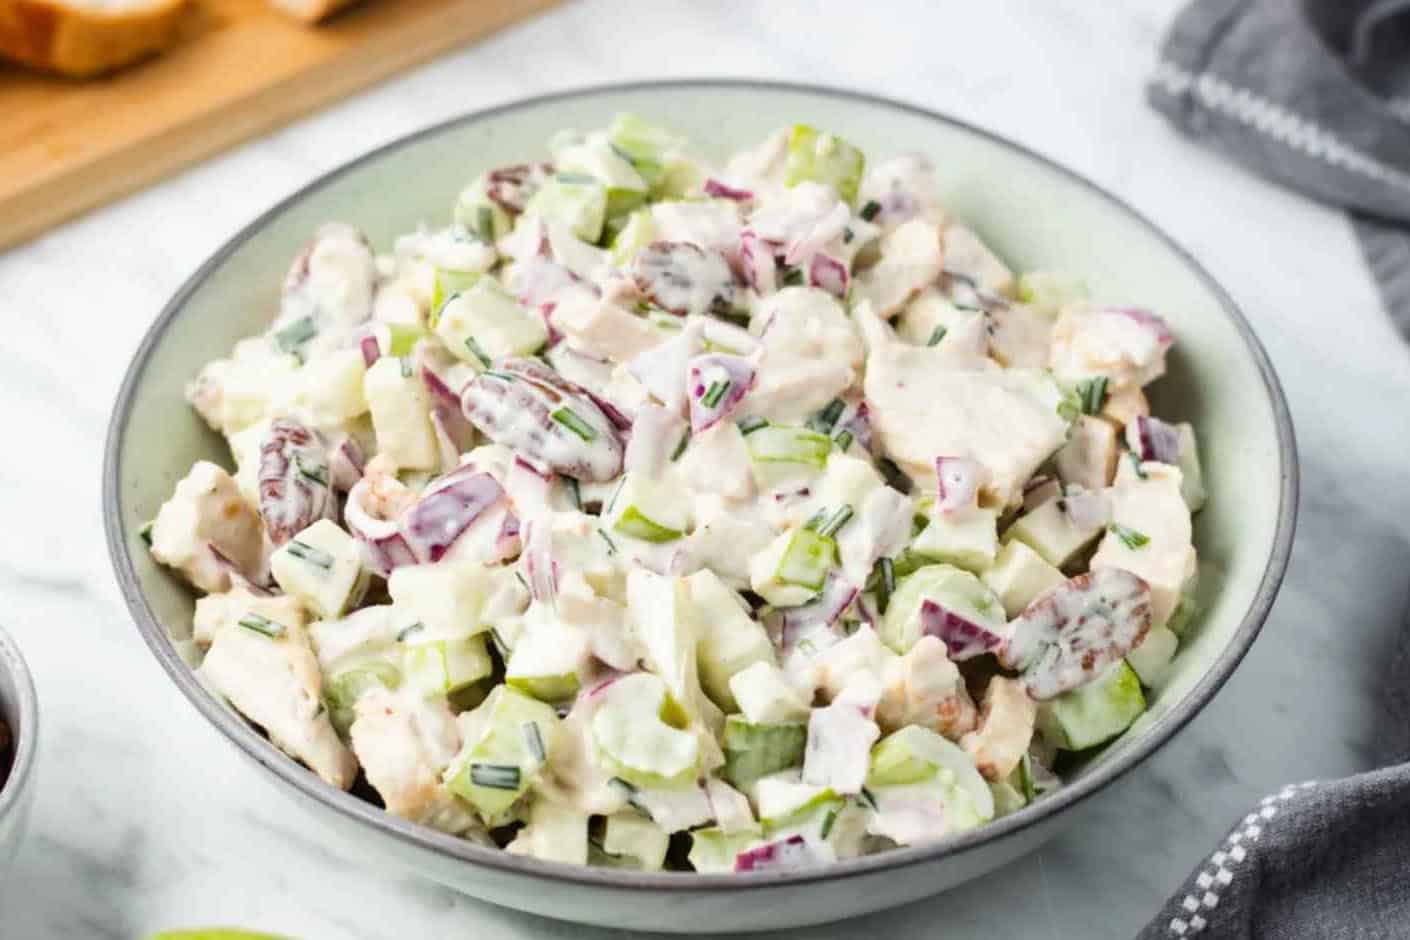 Things to Consider before Freezing Chicken Salad